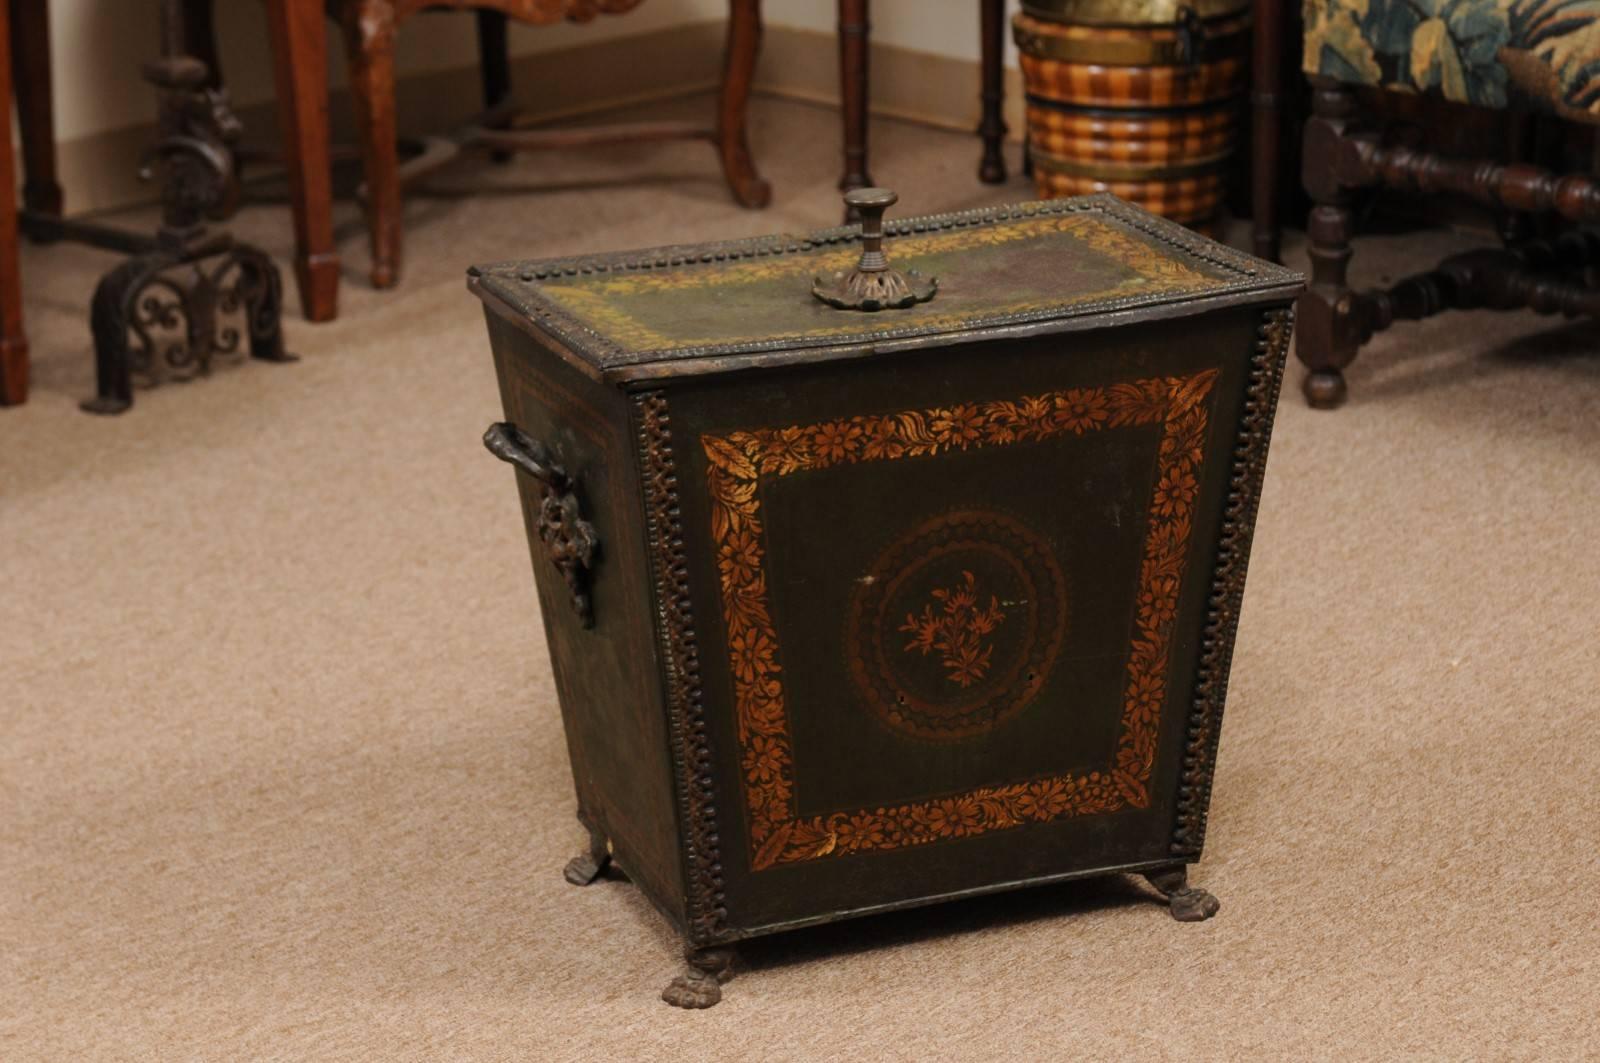 Regency style green painted coal hod with lid and gilt decoration, England 19th century.